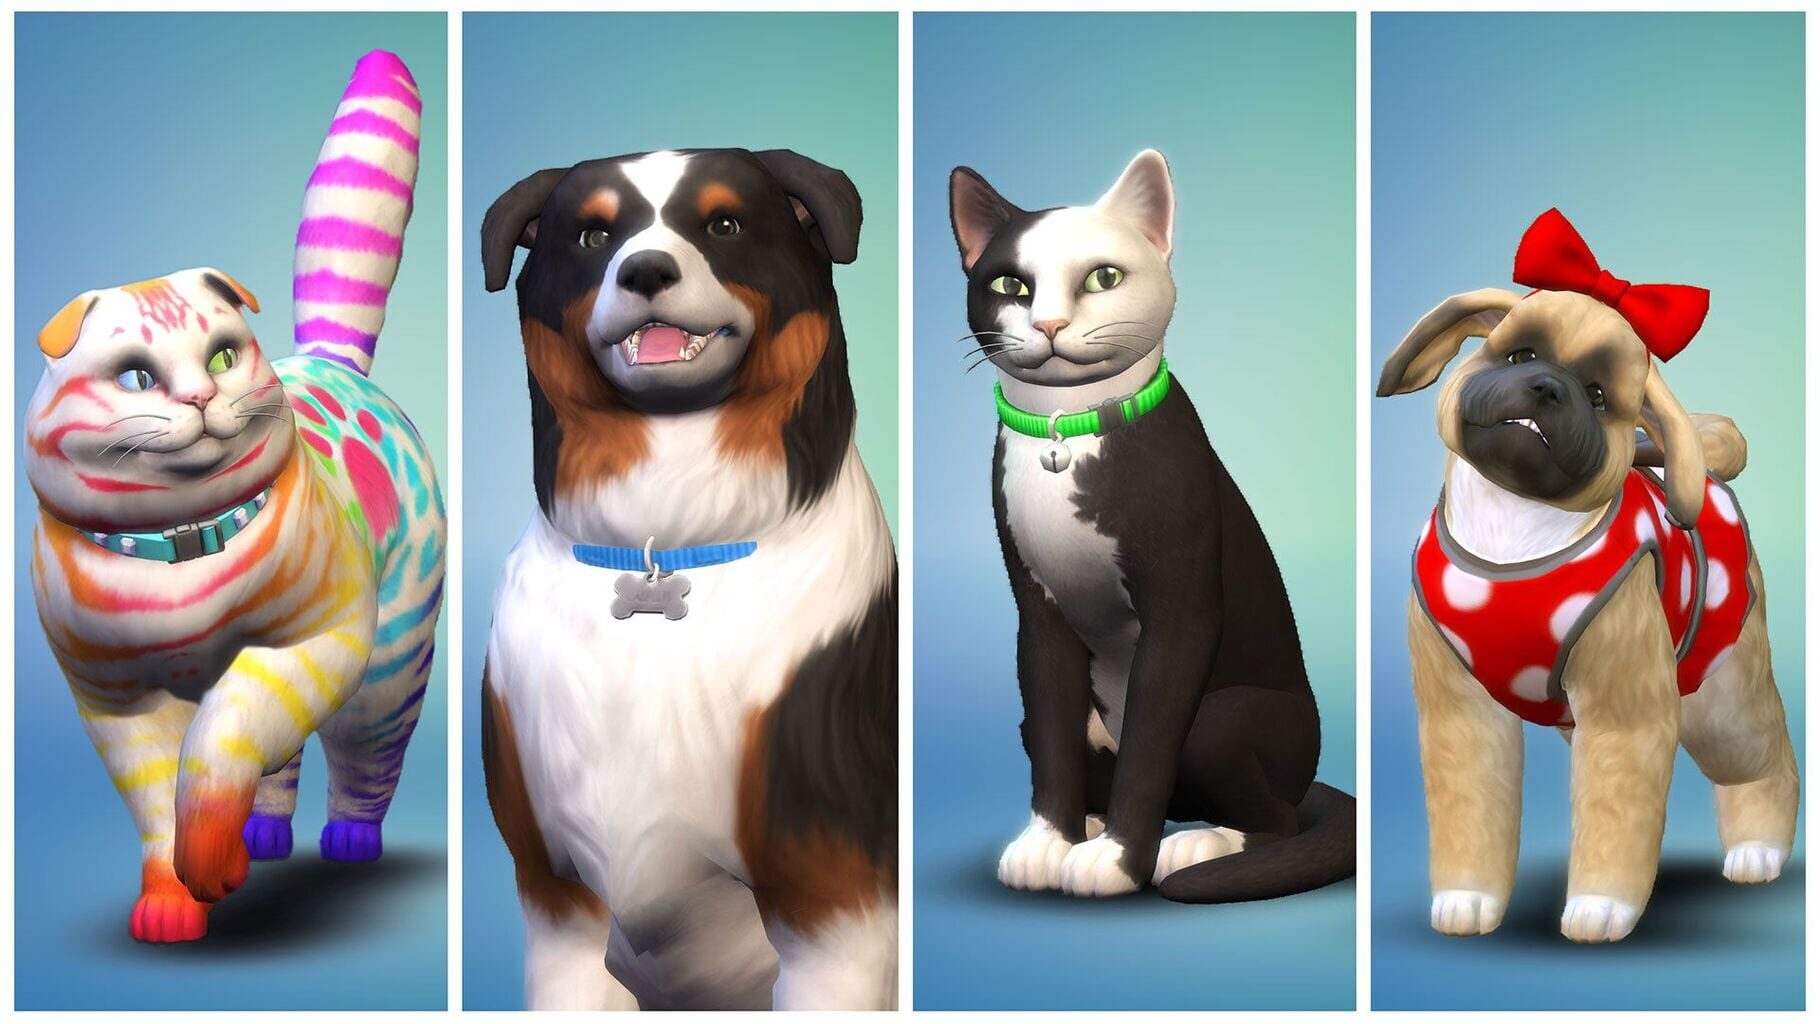 Arte - The Sims 4: Cats & Dogs